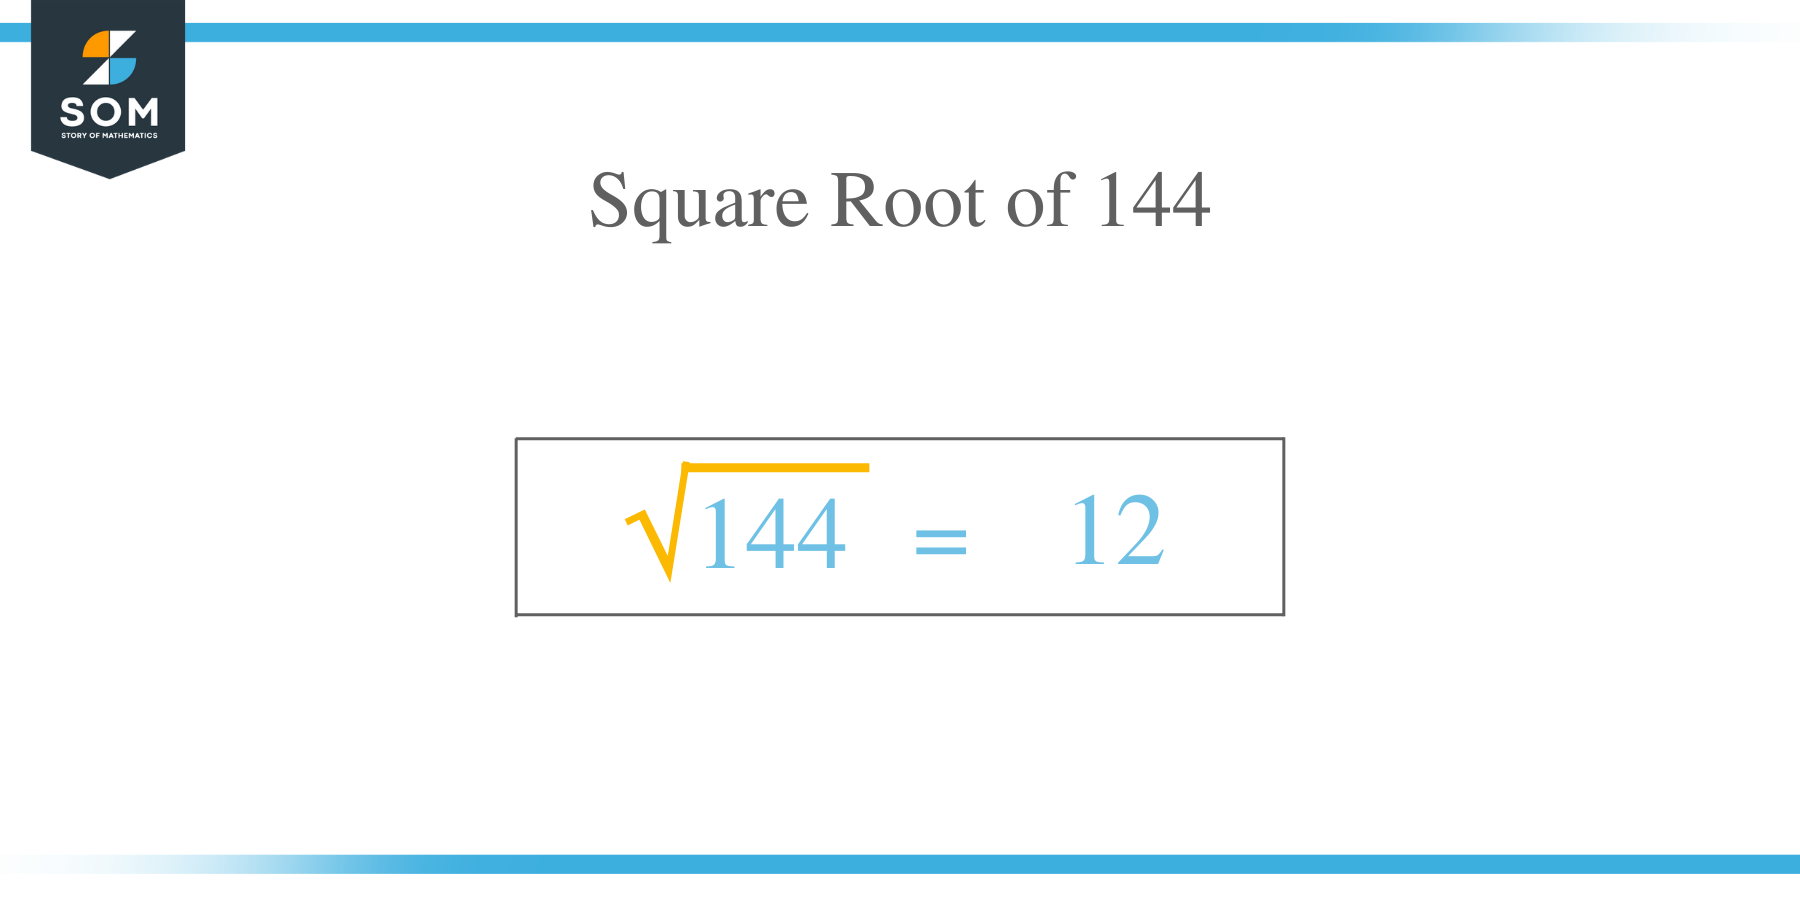 Square Root of 144